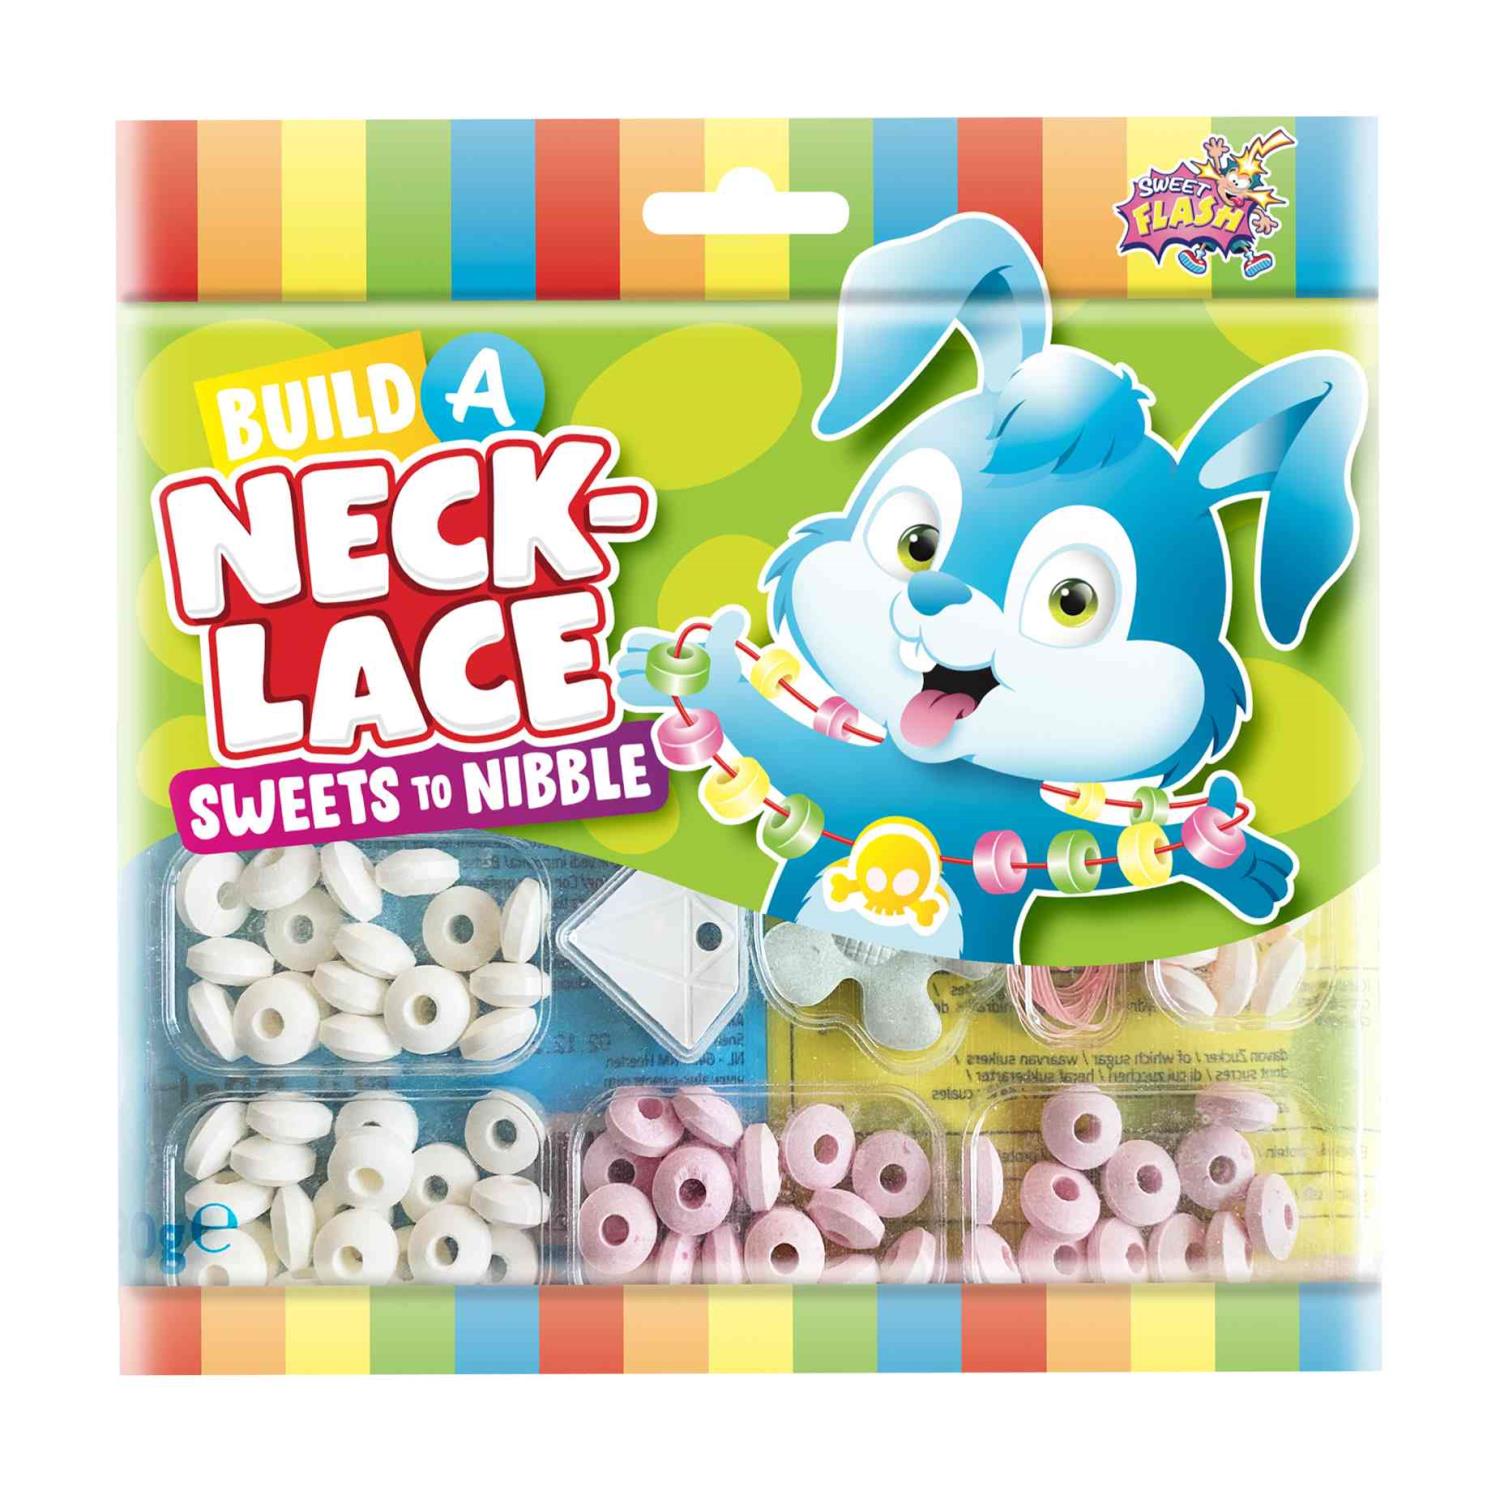 Buid a neck-lace sweets to nibble